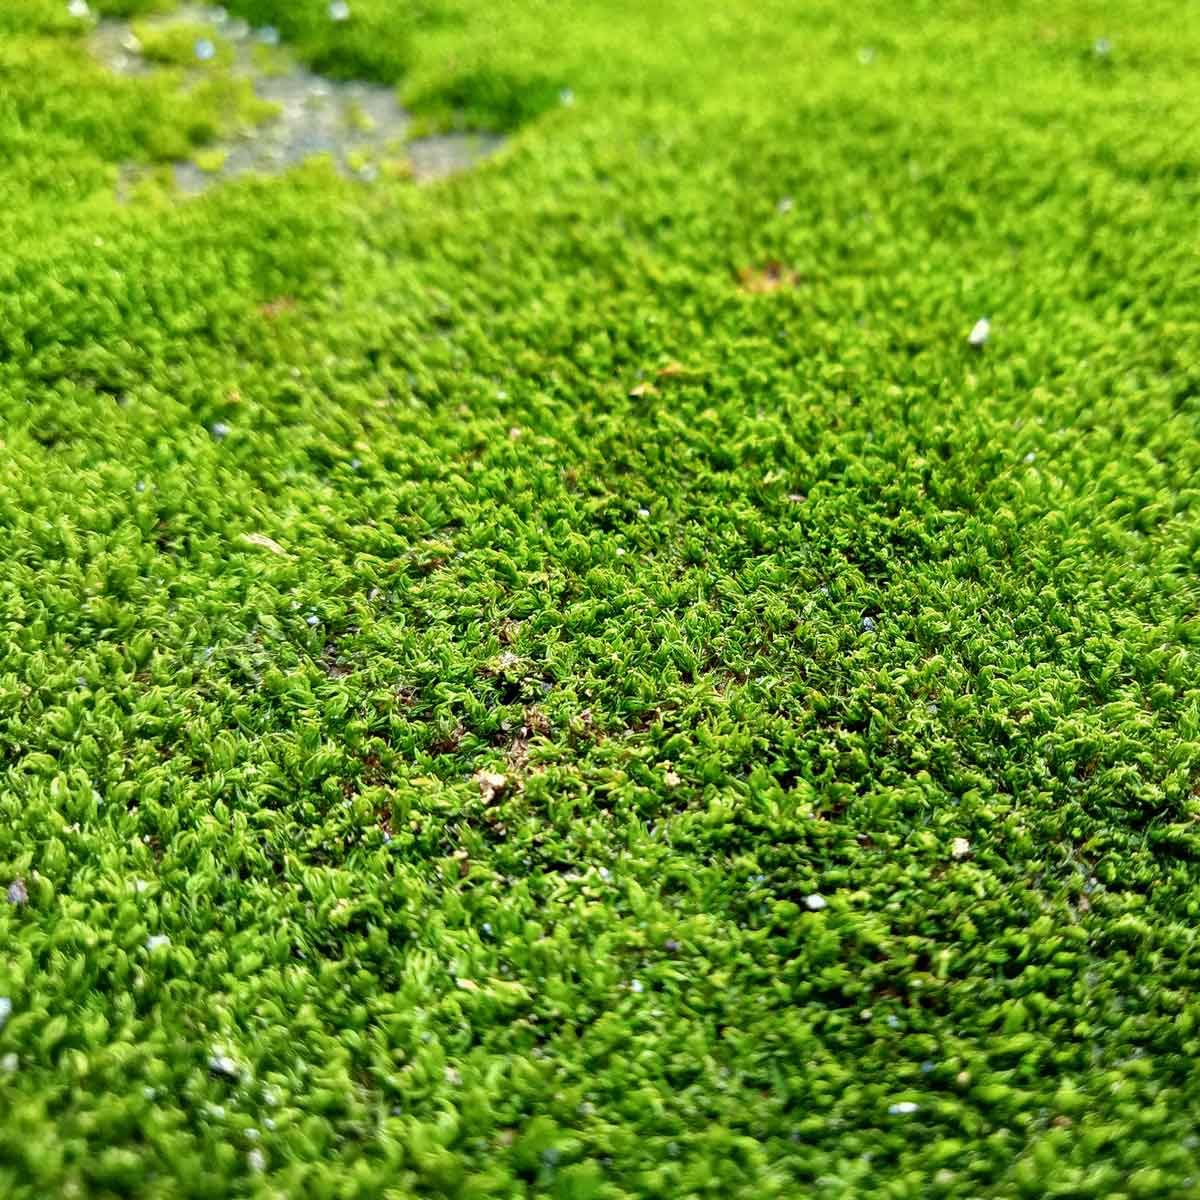 moss grass: grow it or get rid of it?